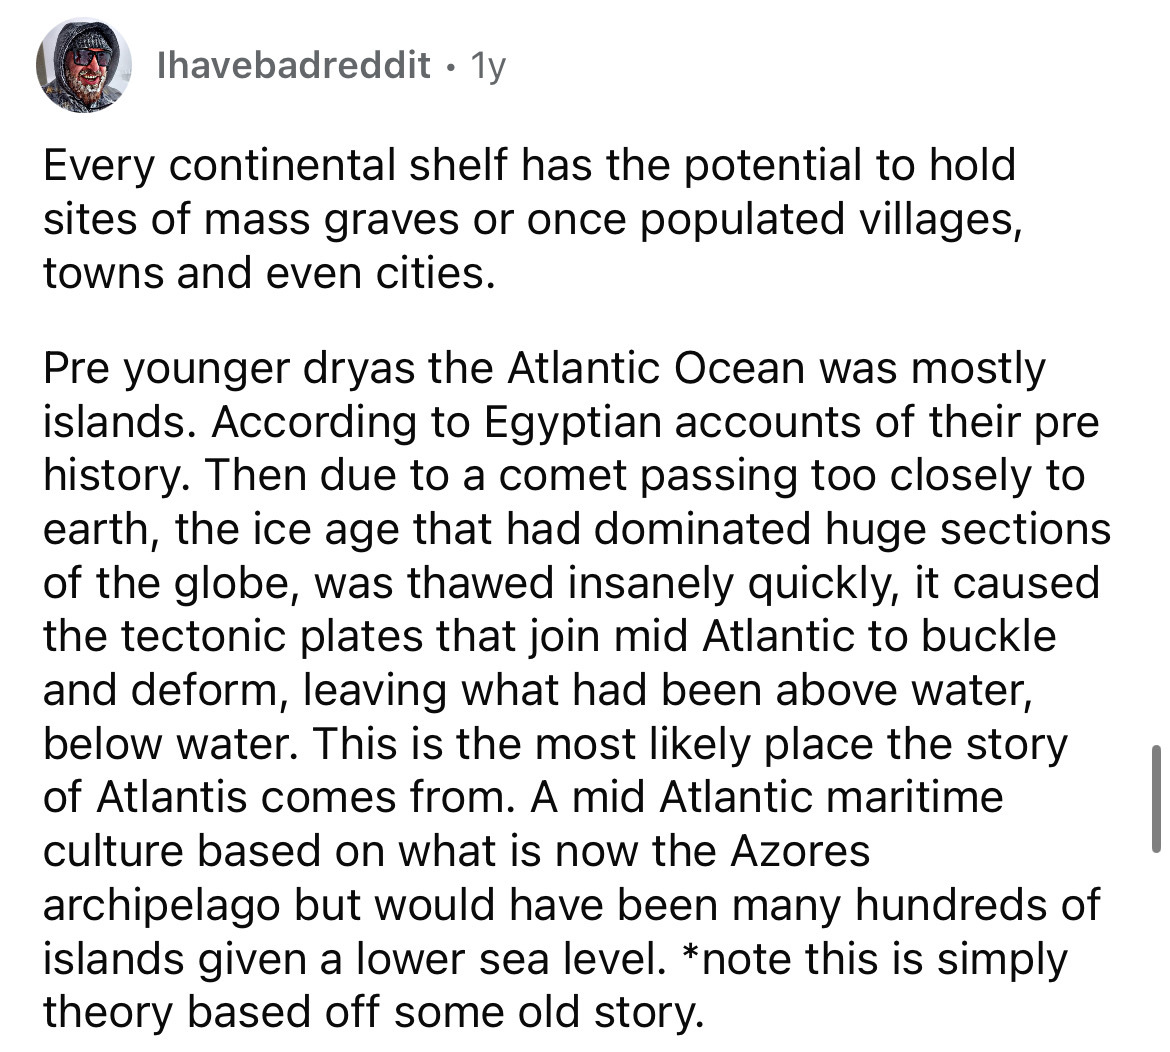 history memes - Ihavebadreddit. 1y Every continental shelf has the potential to hold sites of mass graves or once populated villages, towns and even cities. Pre younger dryas the Atlantic Ocean was mostly islands. According to Egyptian accounts of their p